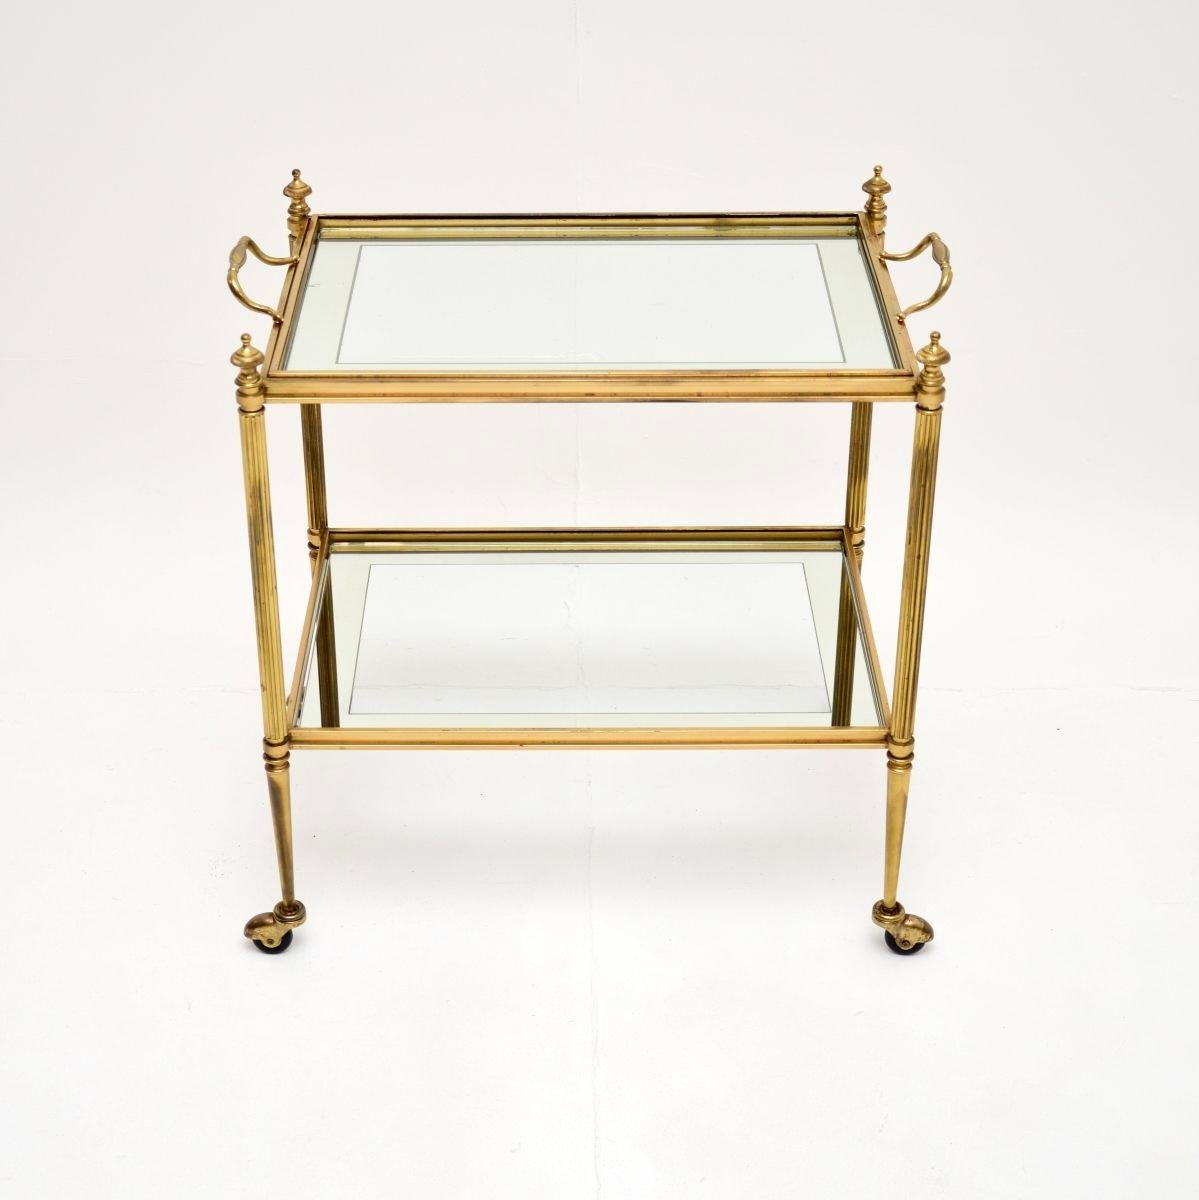 A stylish and very well made vintage French brass drinks trolley, dating from the 1950-60’s.

This is beautifully designed and is of lovely quality. It is quite petite, the inset glass shelves have a mirrored border and can be removed. The top